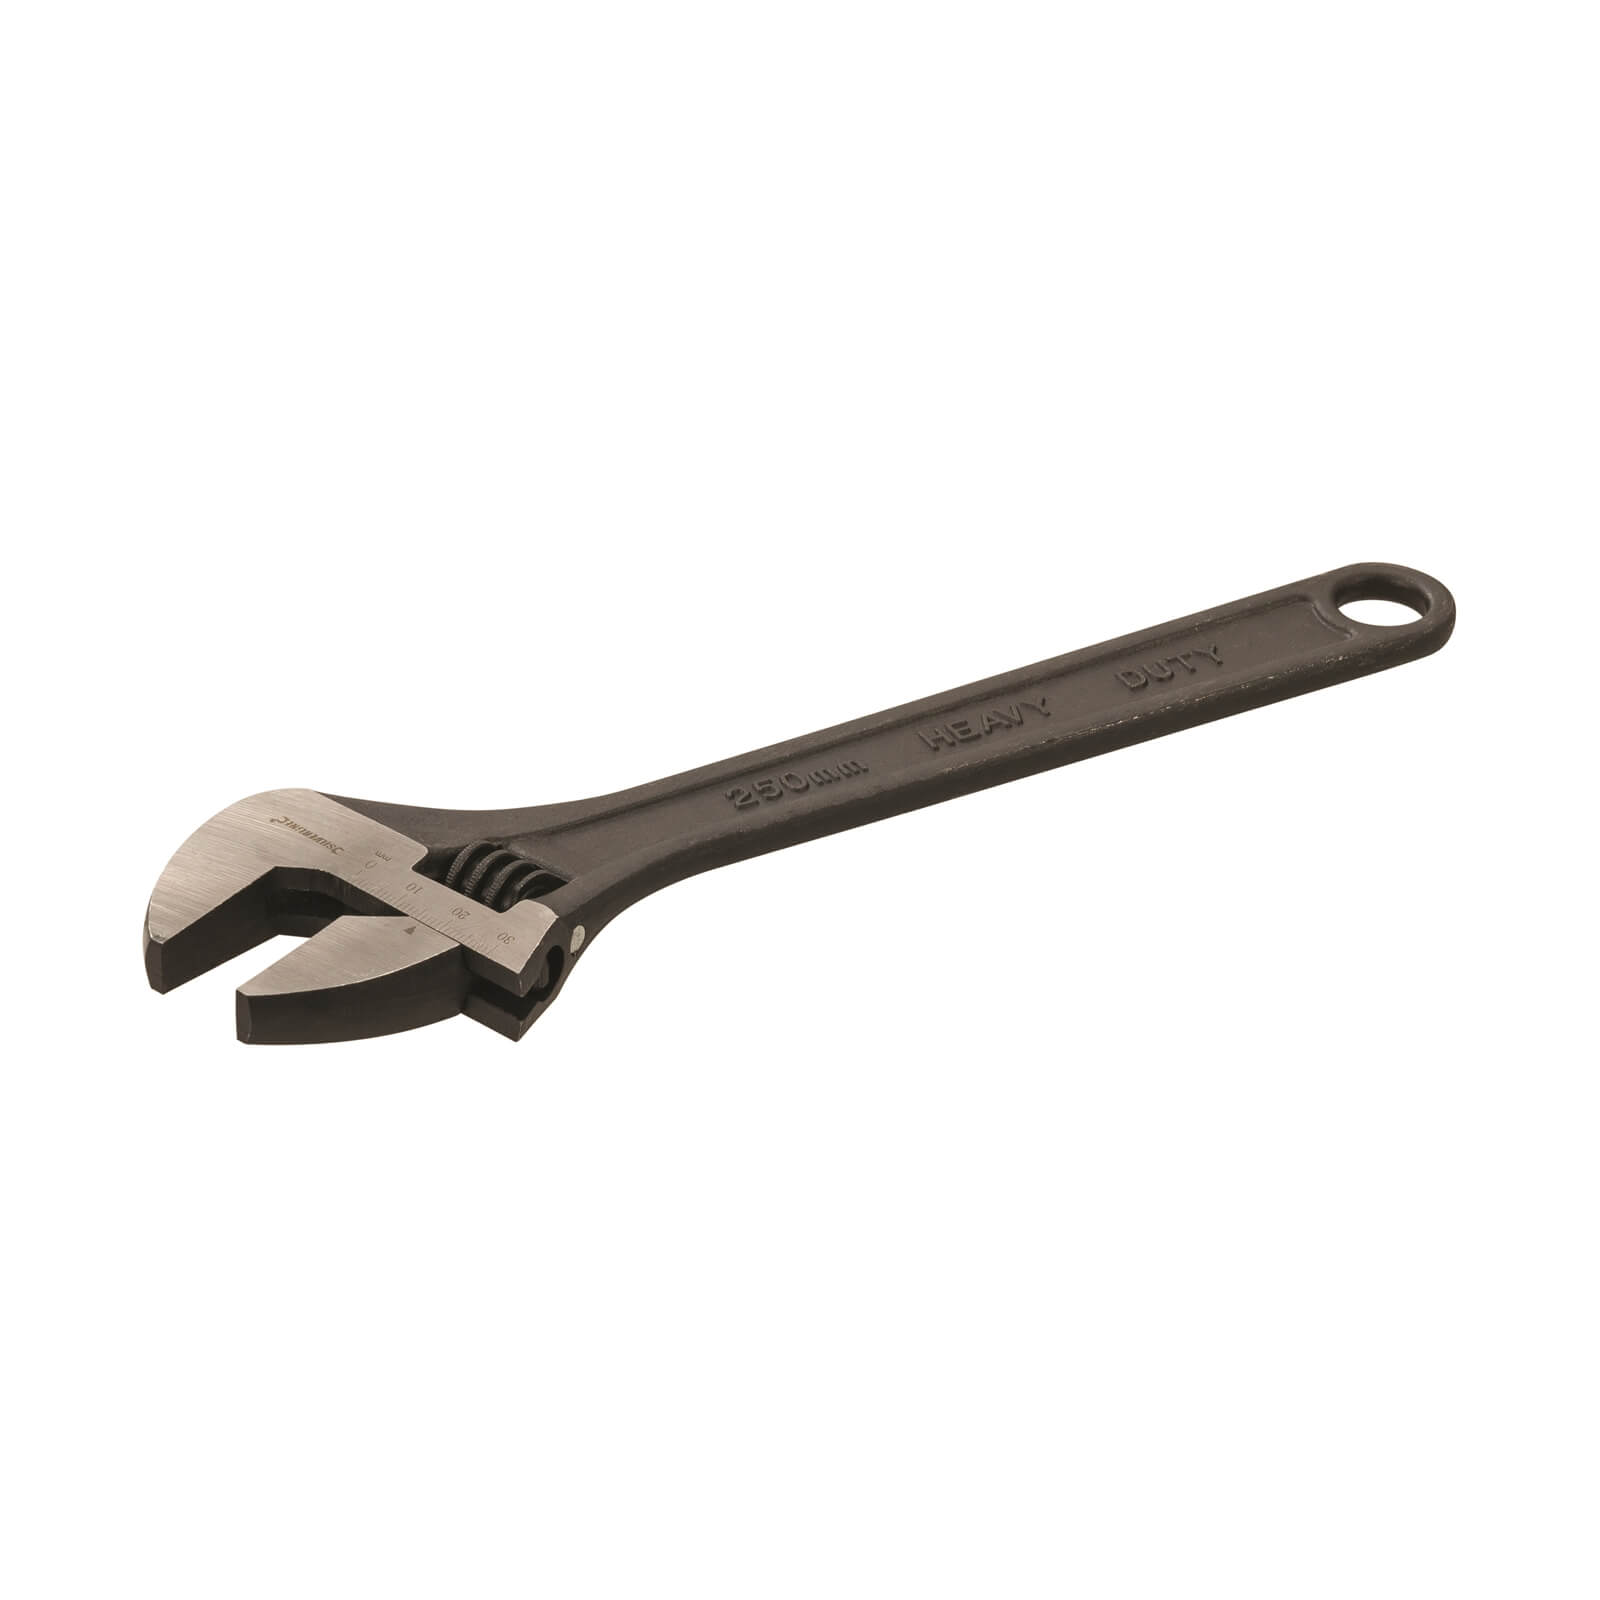 Photo of Silverline Expert Adjustable Wrench 200mm Jaw 22mm